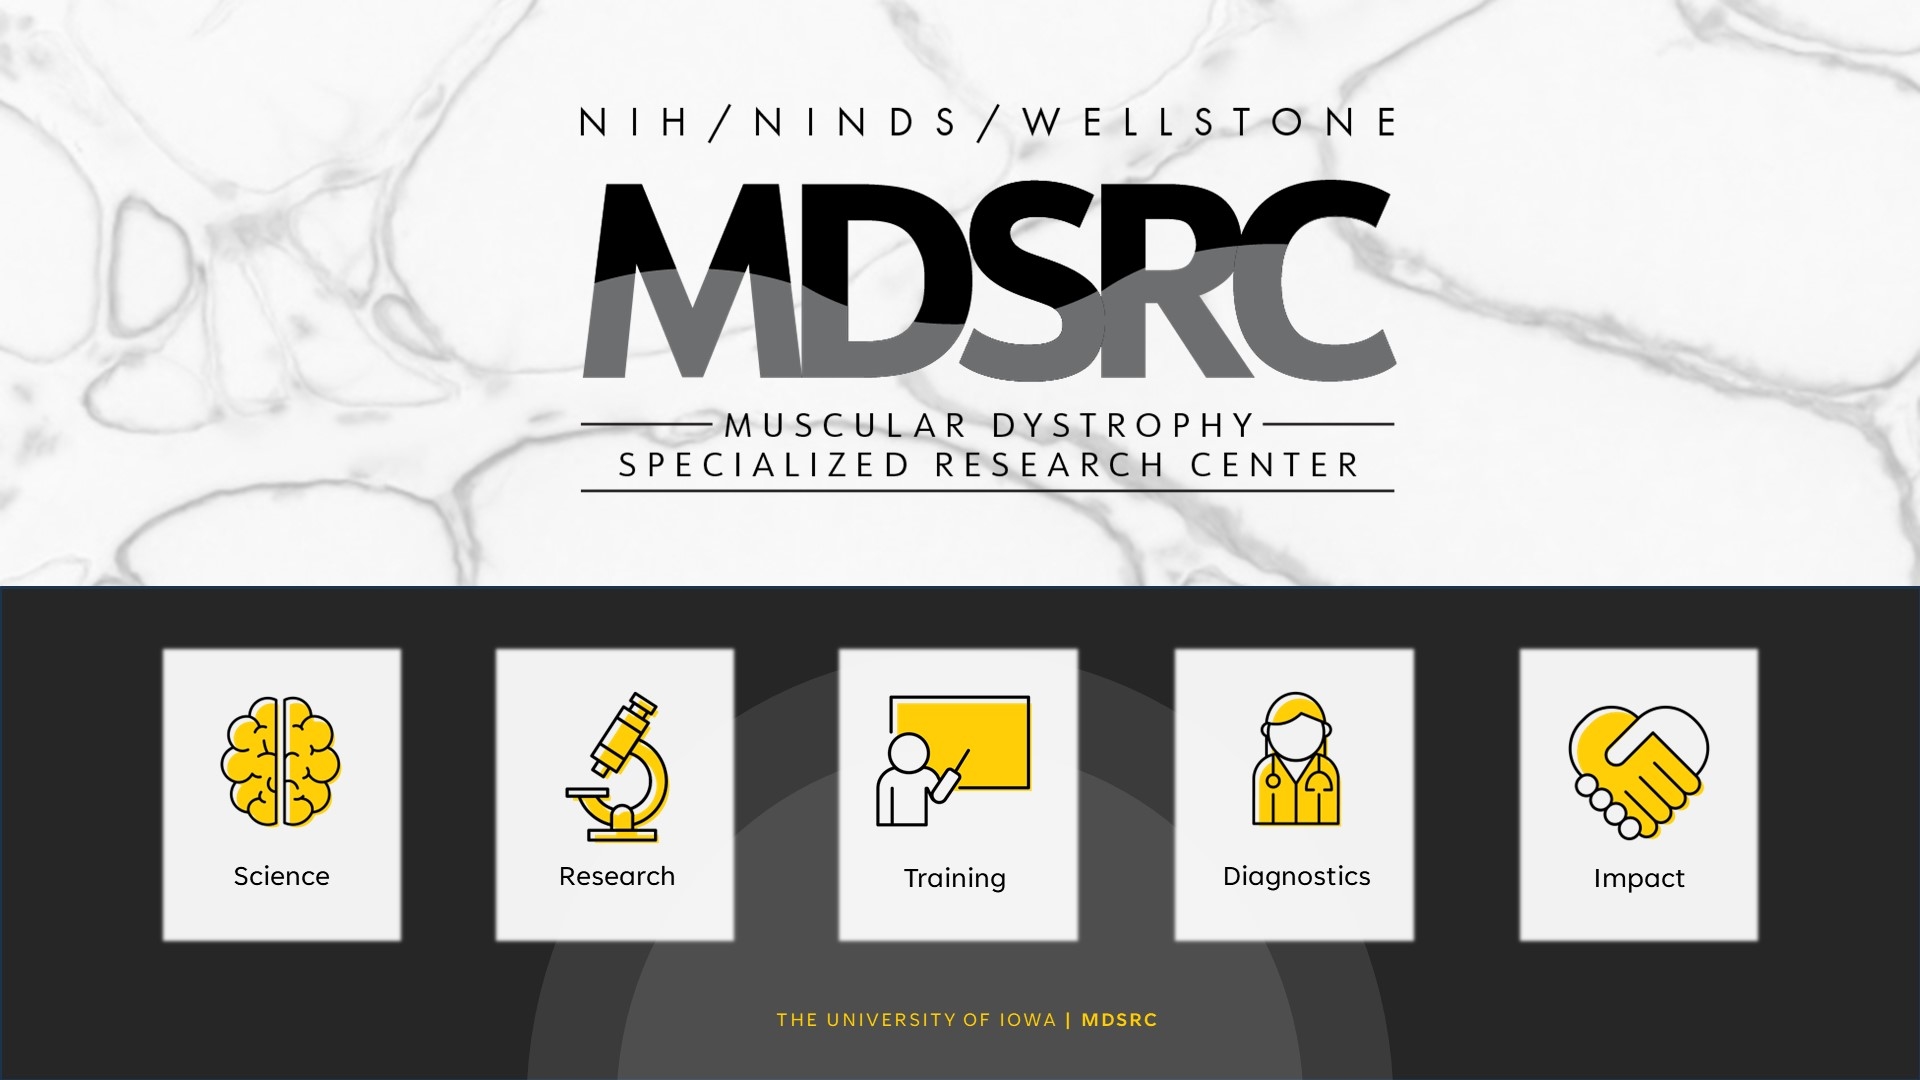 Introduction to Wellstone Muscular Dystrophy Specialized Research Center (MDSRC)